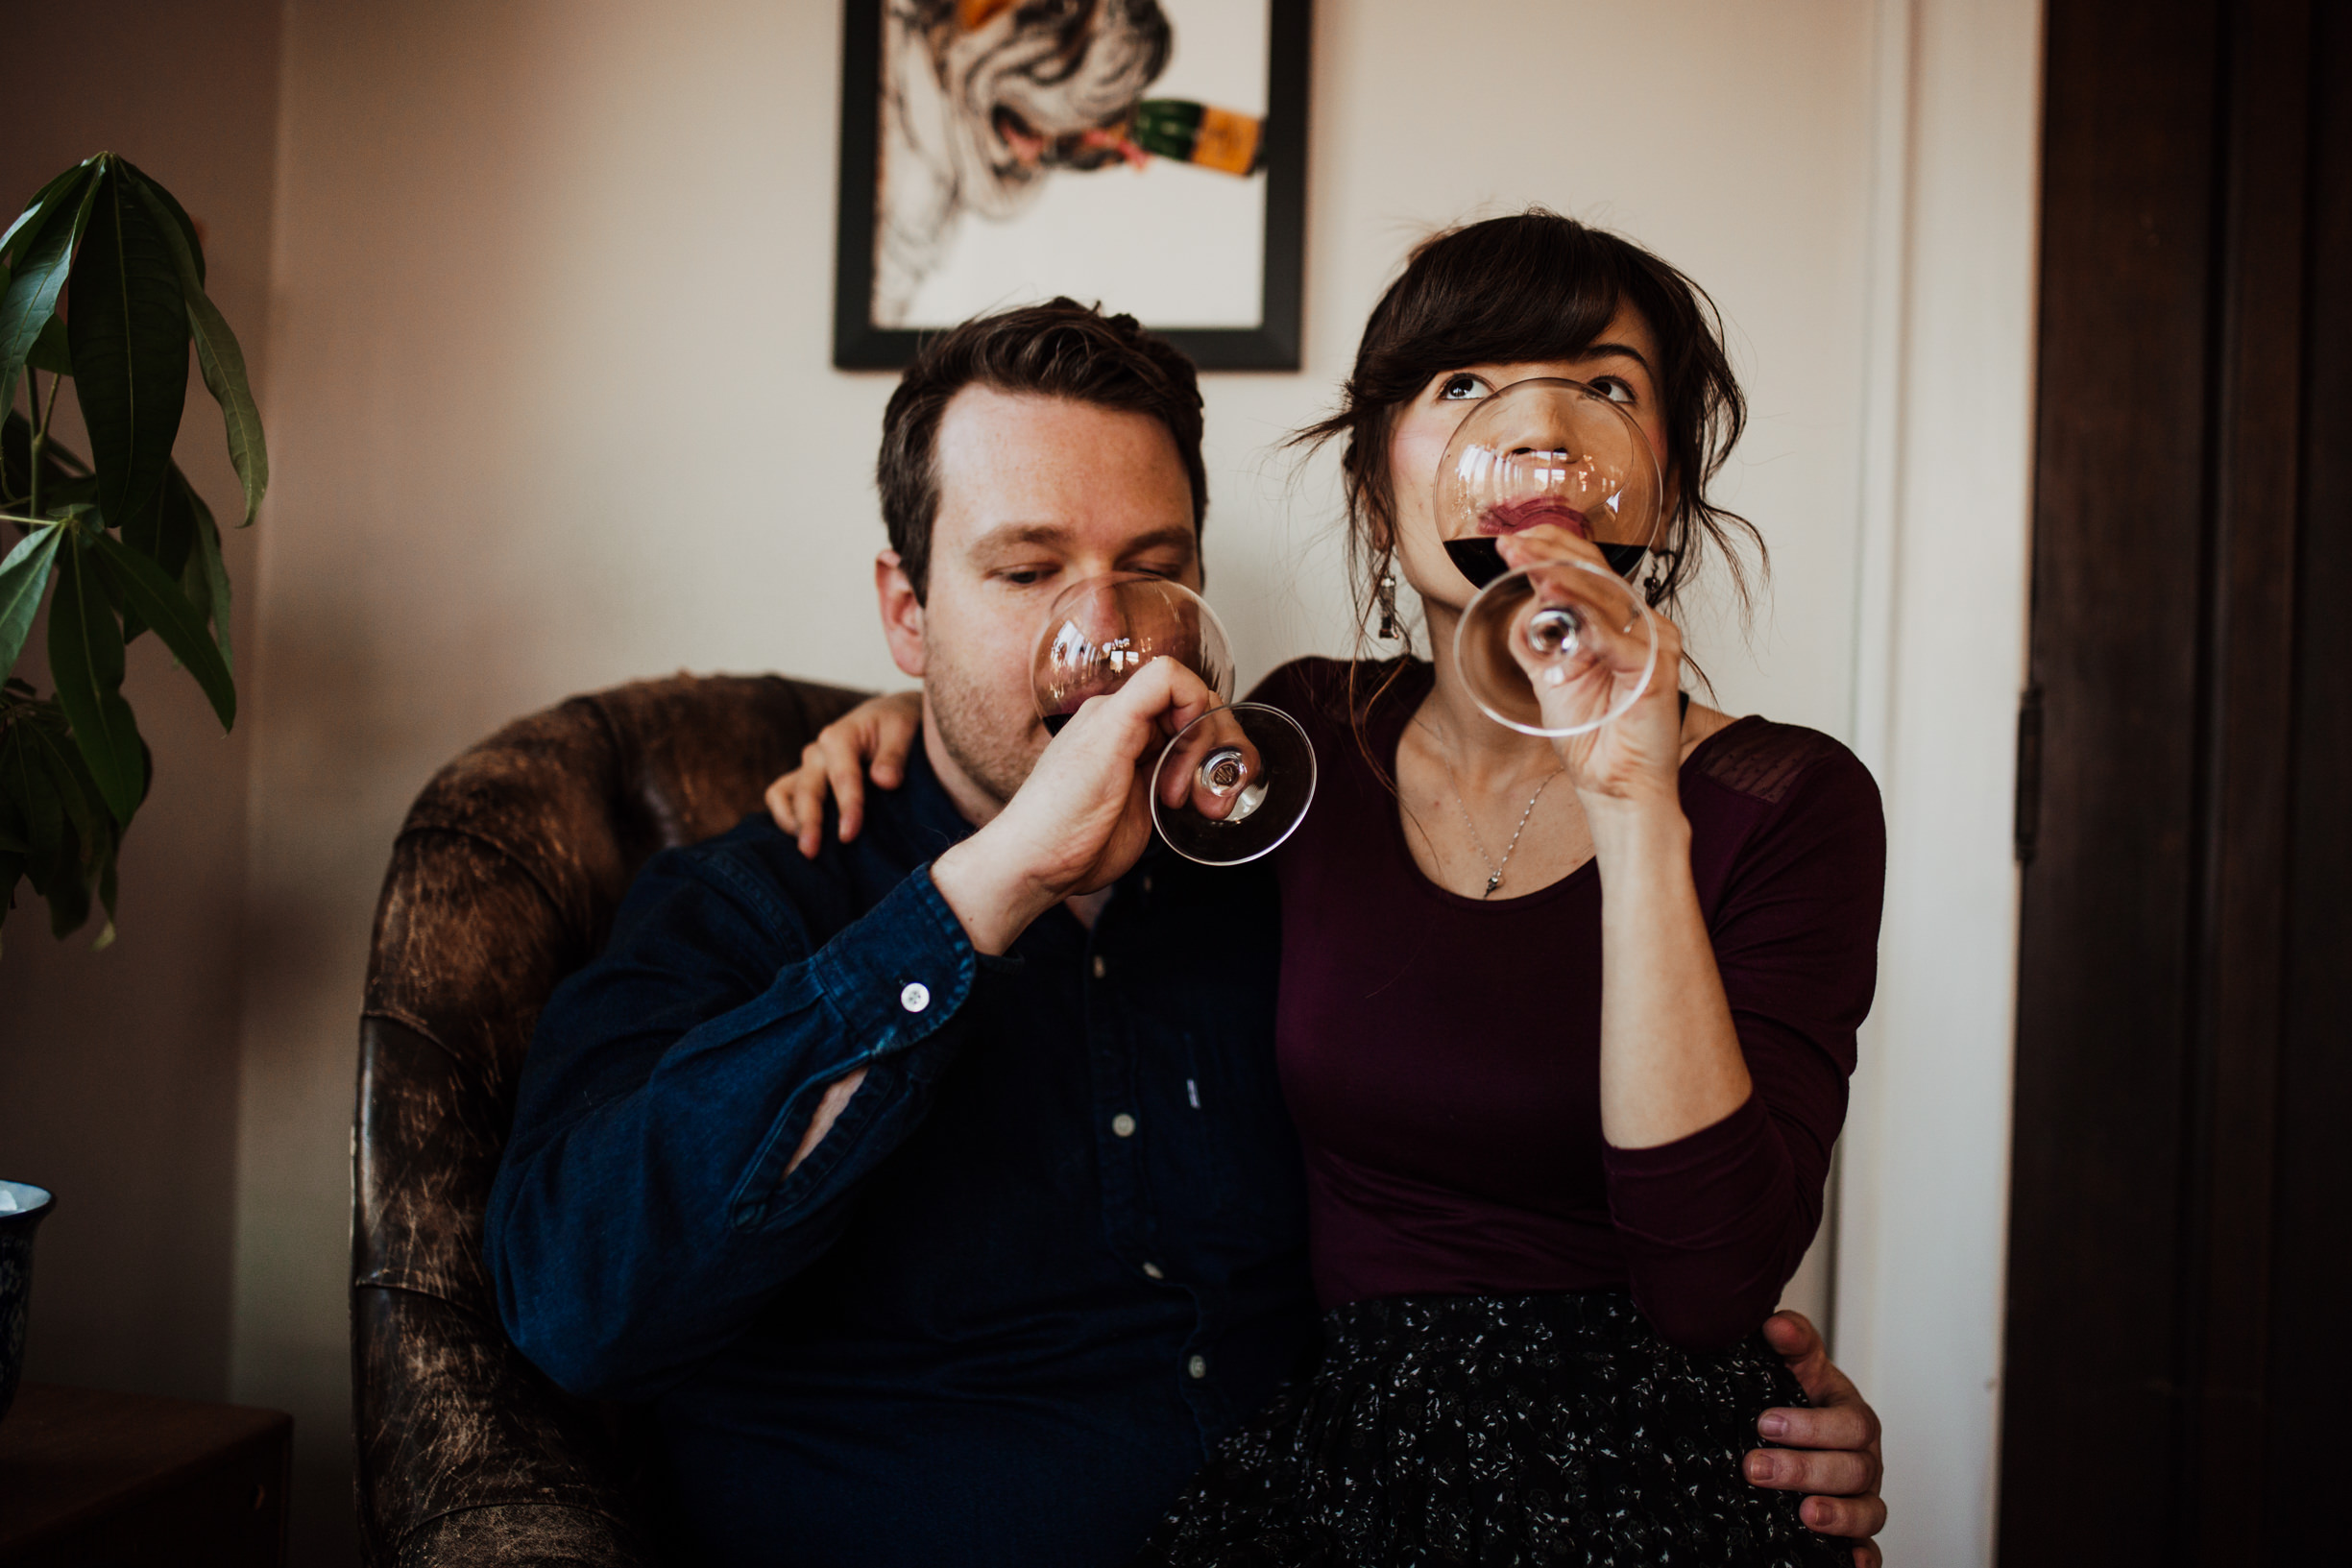 louisville-engagement-photographer-record-store-in-home-session-crystal-ludwick-photo (18 of 53).jpg